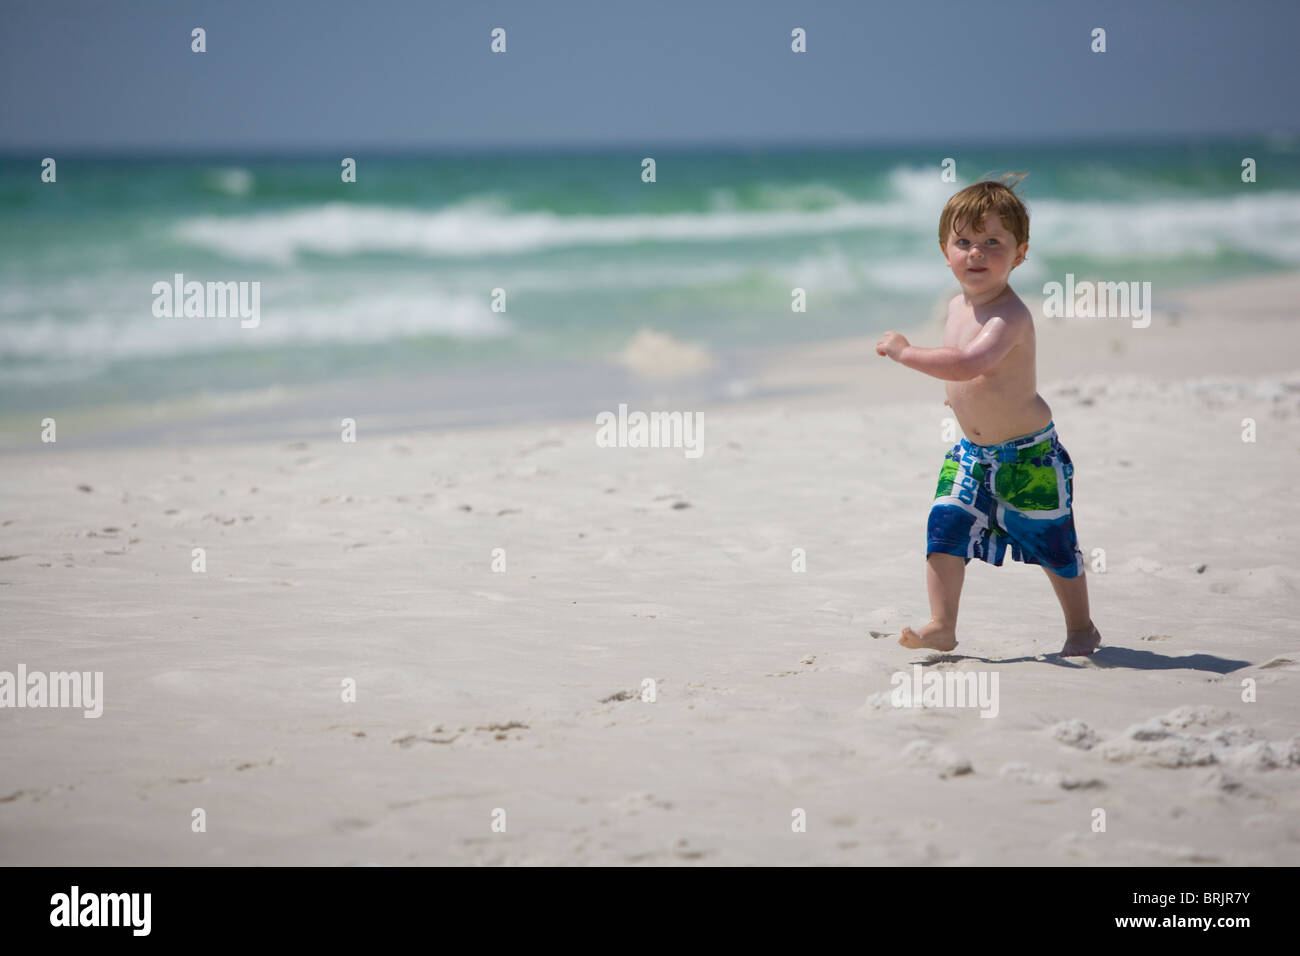 A little boy struts down the beach with the ocean in background. Stock Photo